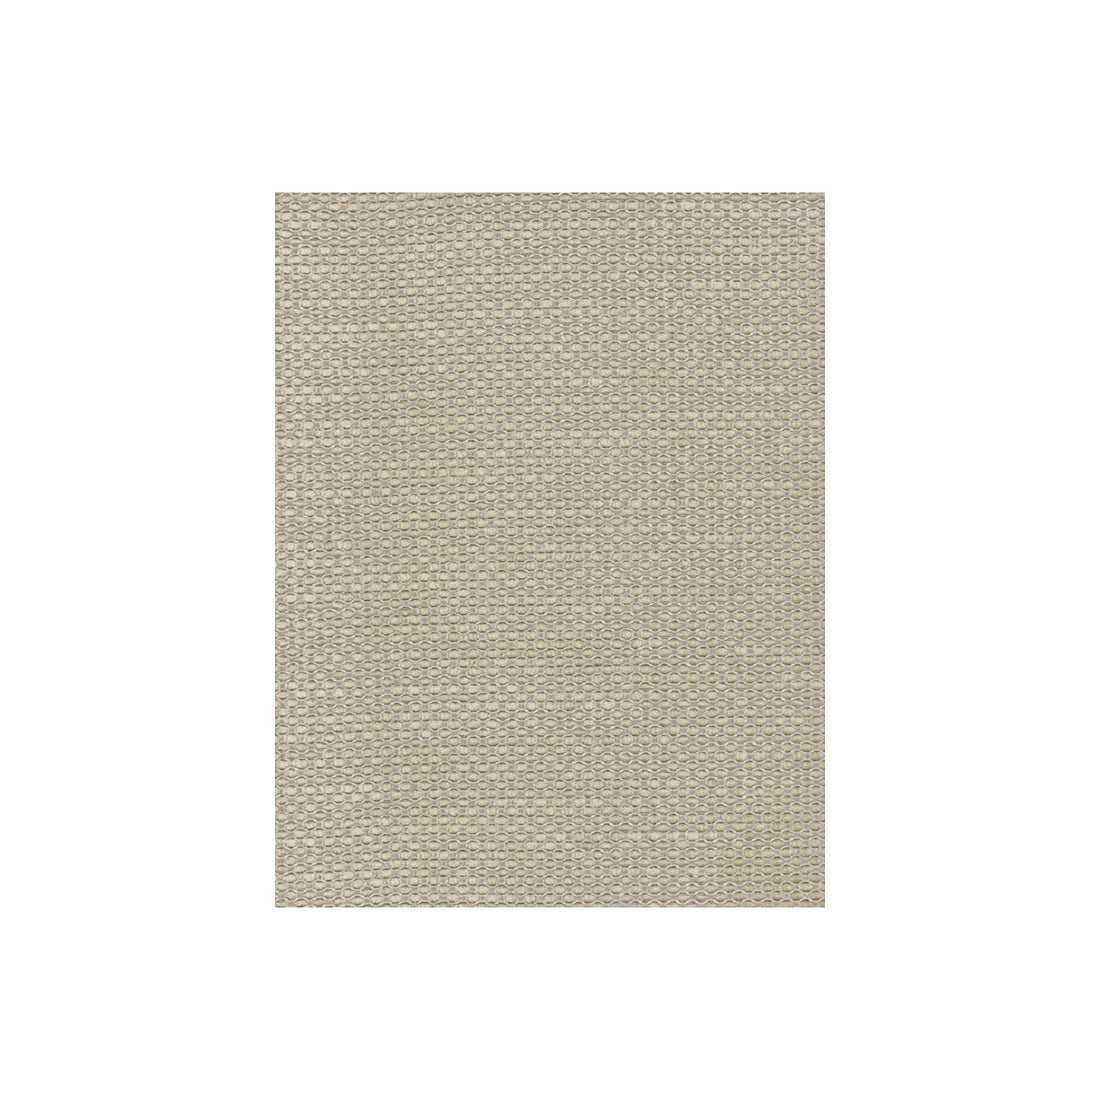 Ricci fabric in natural color - pattern AM100028.16.0 - by Kravet Couture in the Andrew Martin Anthem collection